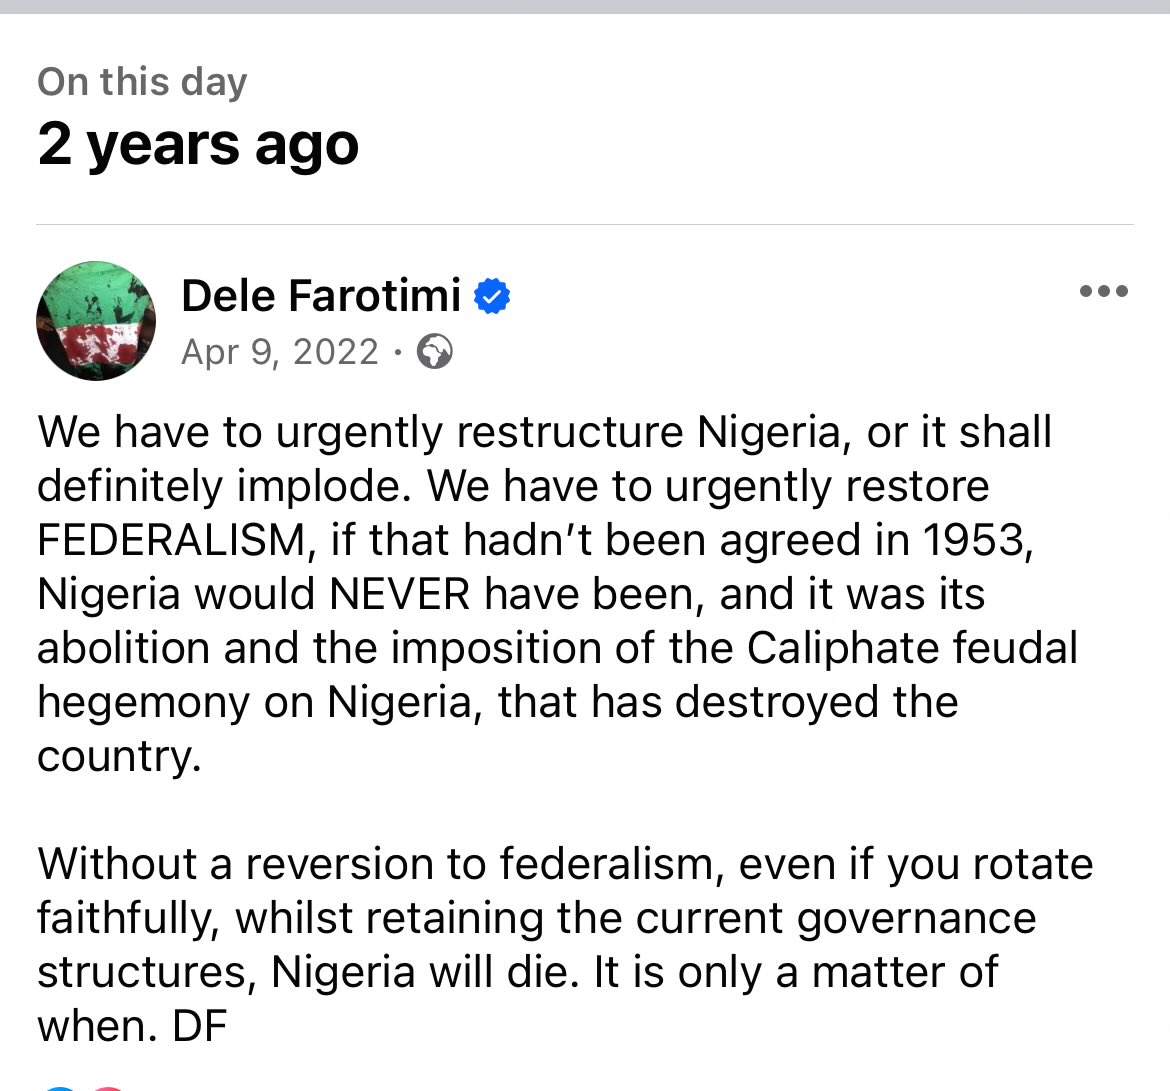 We have to urgently restructure Nigeria, or it shall definitely implode. We have to urgently restore FEDERALISM, if that hadn’t been agreed in 1953, Nigeria would NEVER have been, and it was its abolition and the imposition of the Caliphate feudal hegemony on Nigeria..